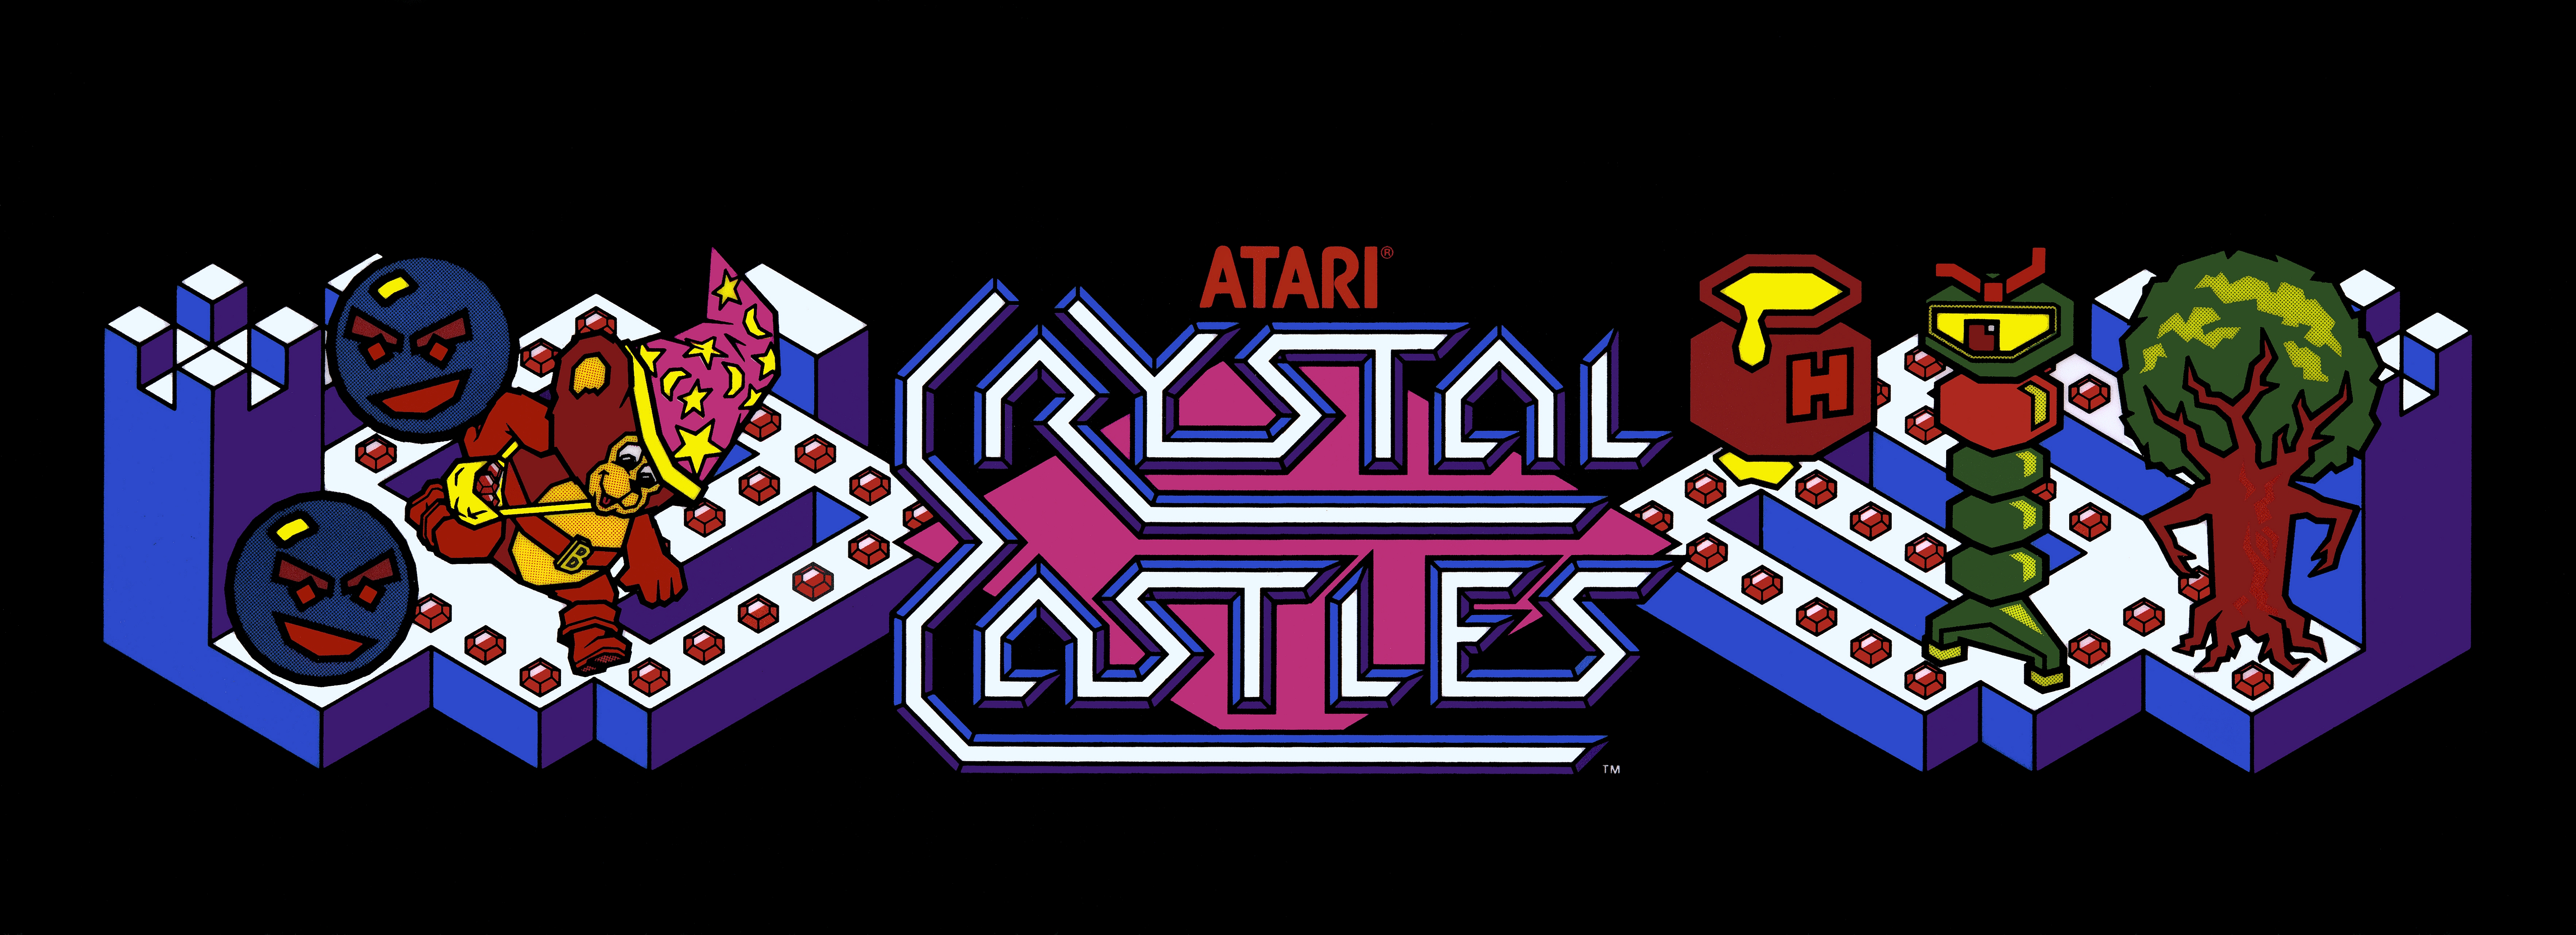 Crystal Castles HD Wallpapers and Backgrounds